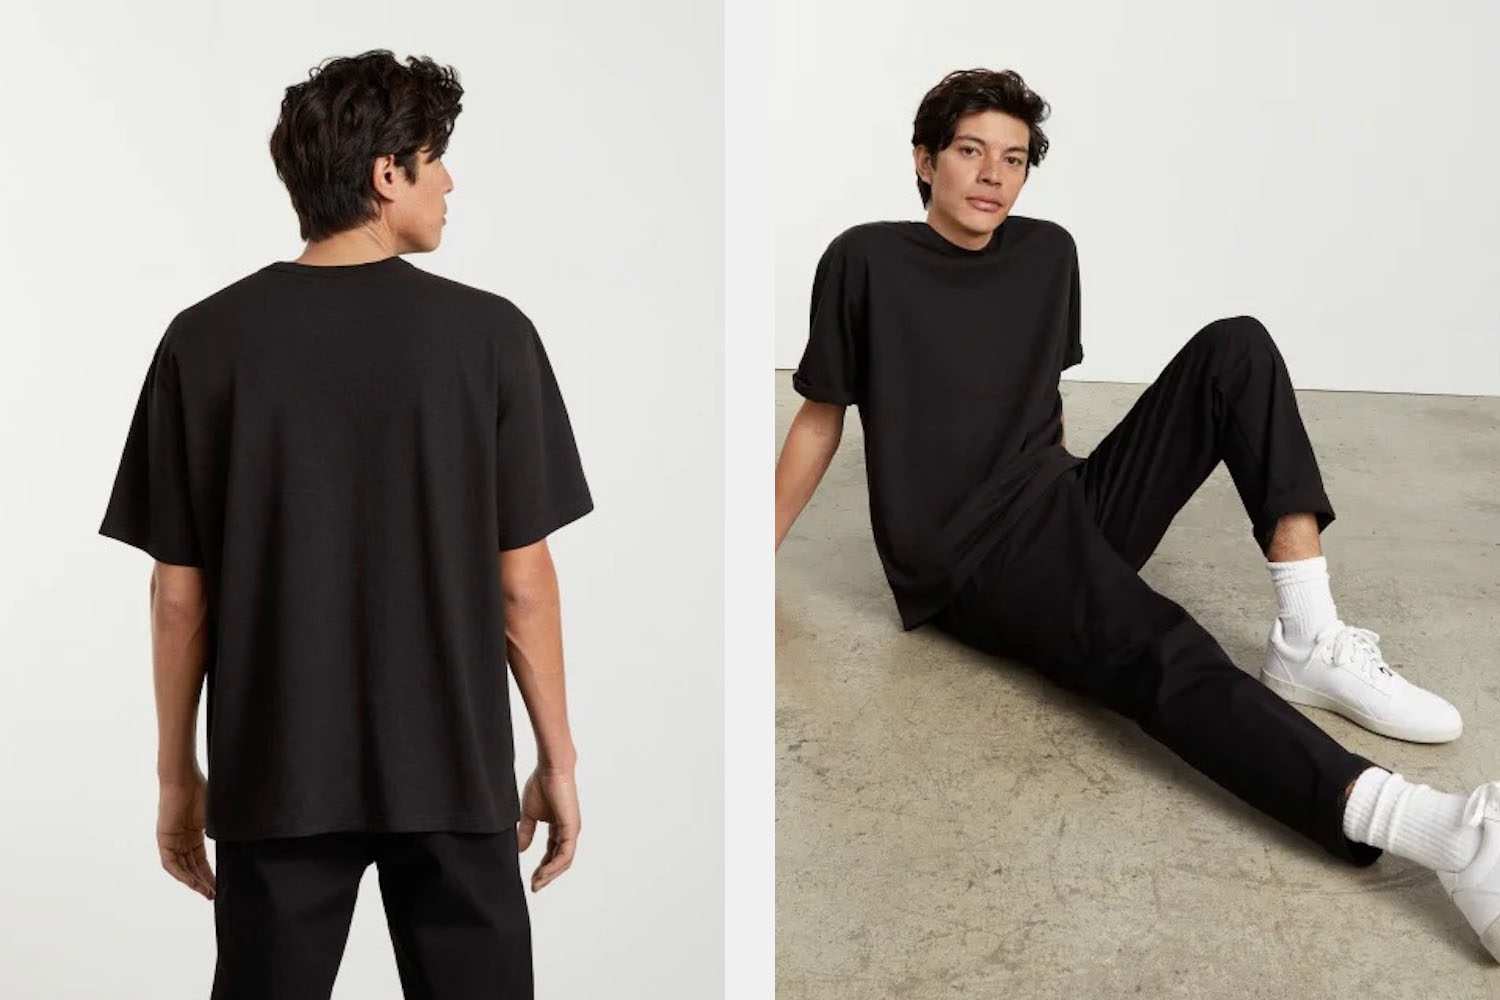 Two side-by-side model shots of an Everlane model in a black hemp tee and black jeans